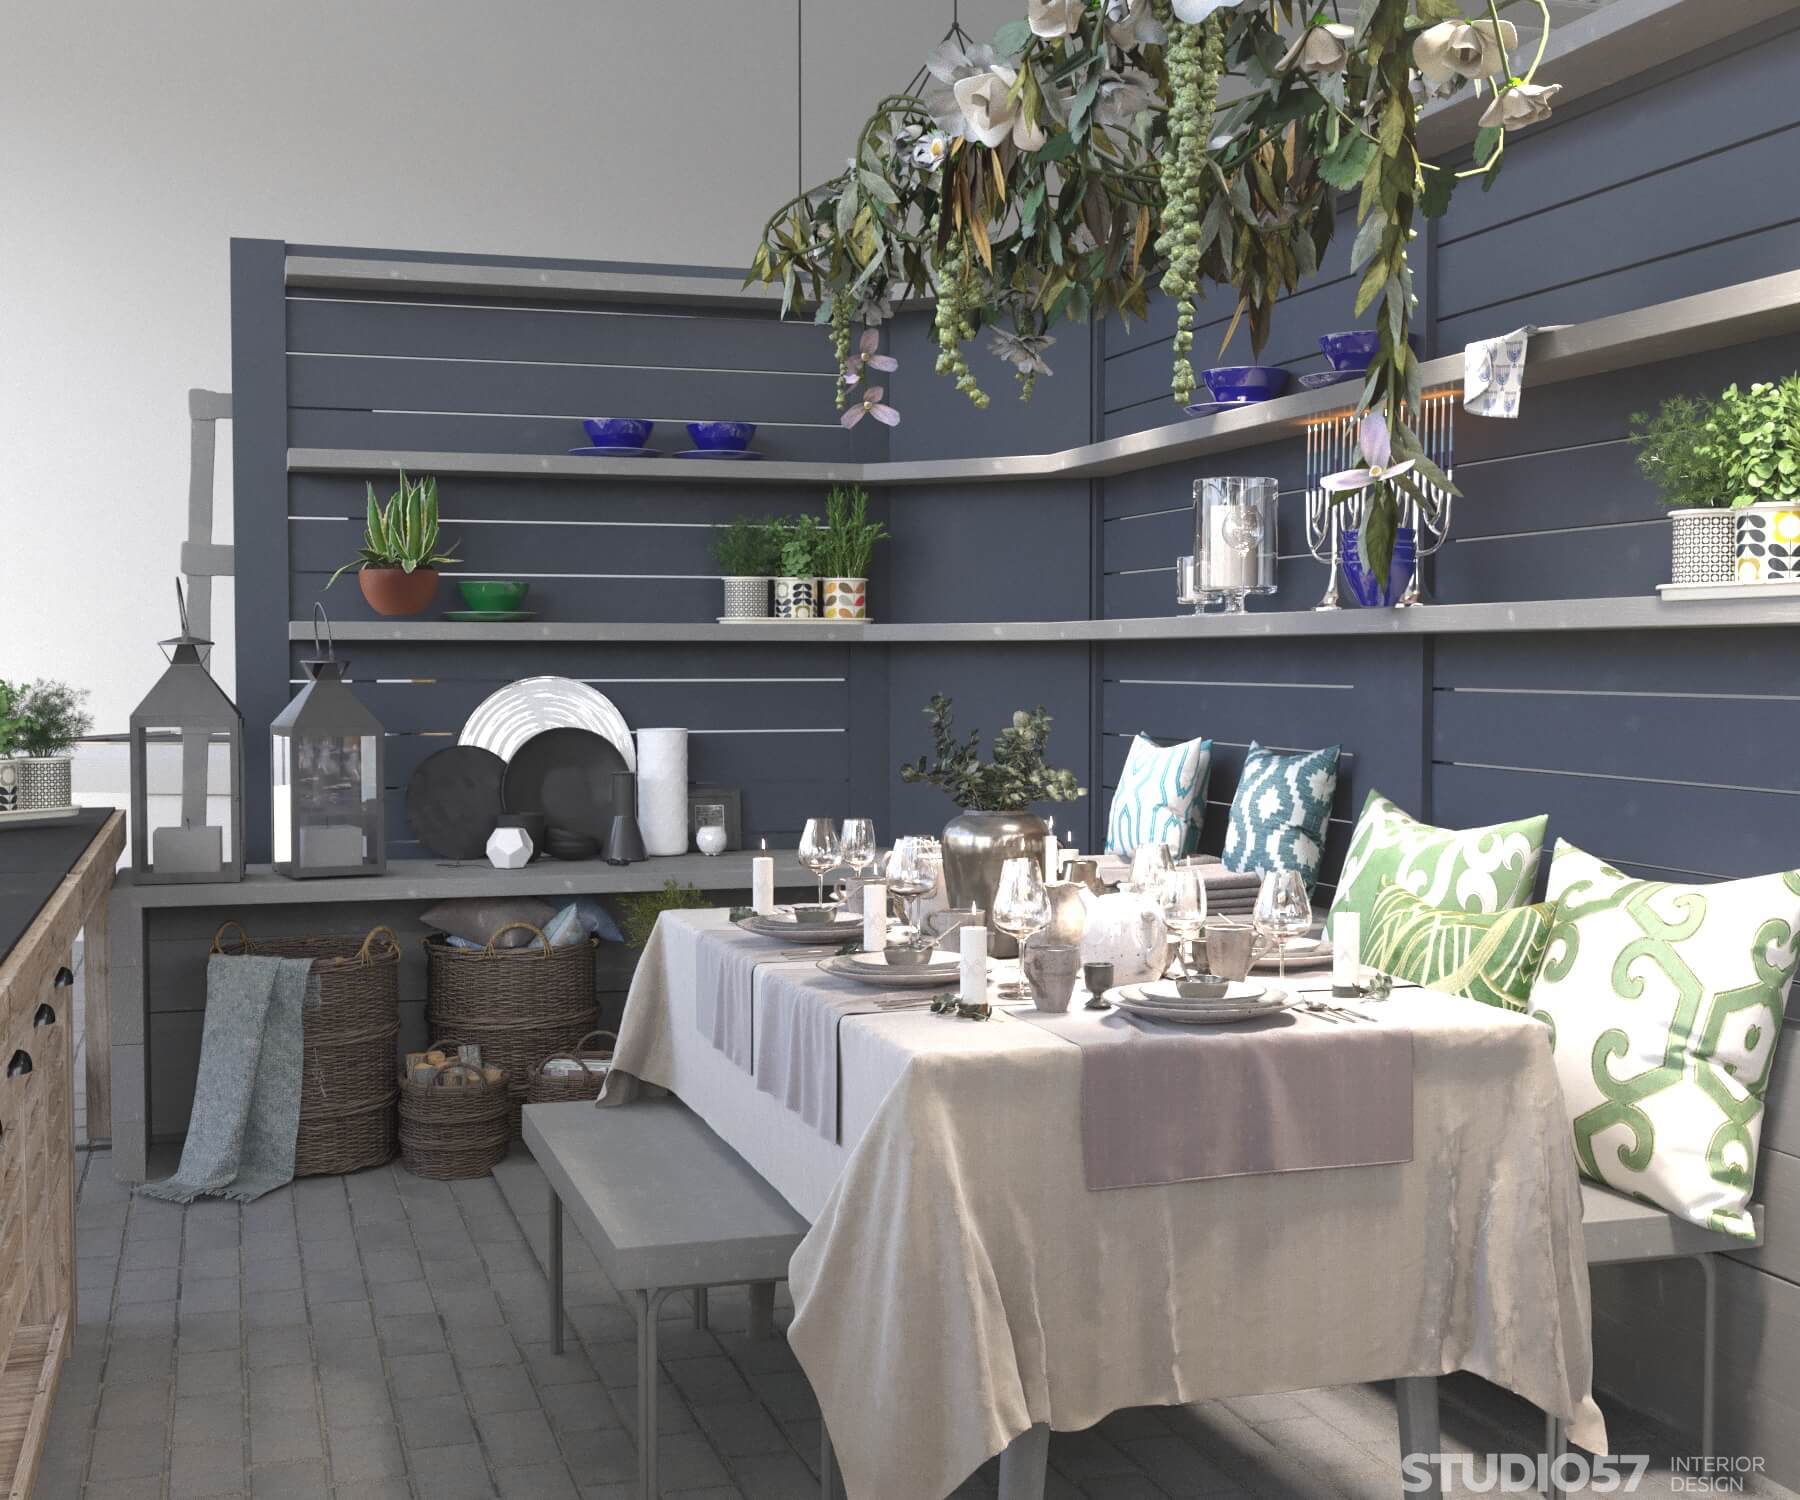 Provence style in store design